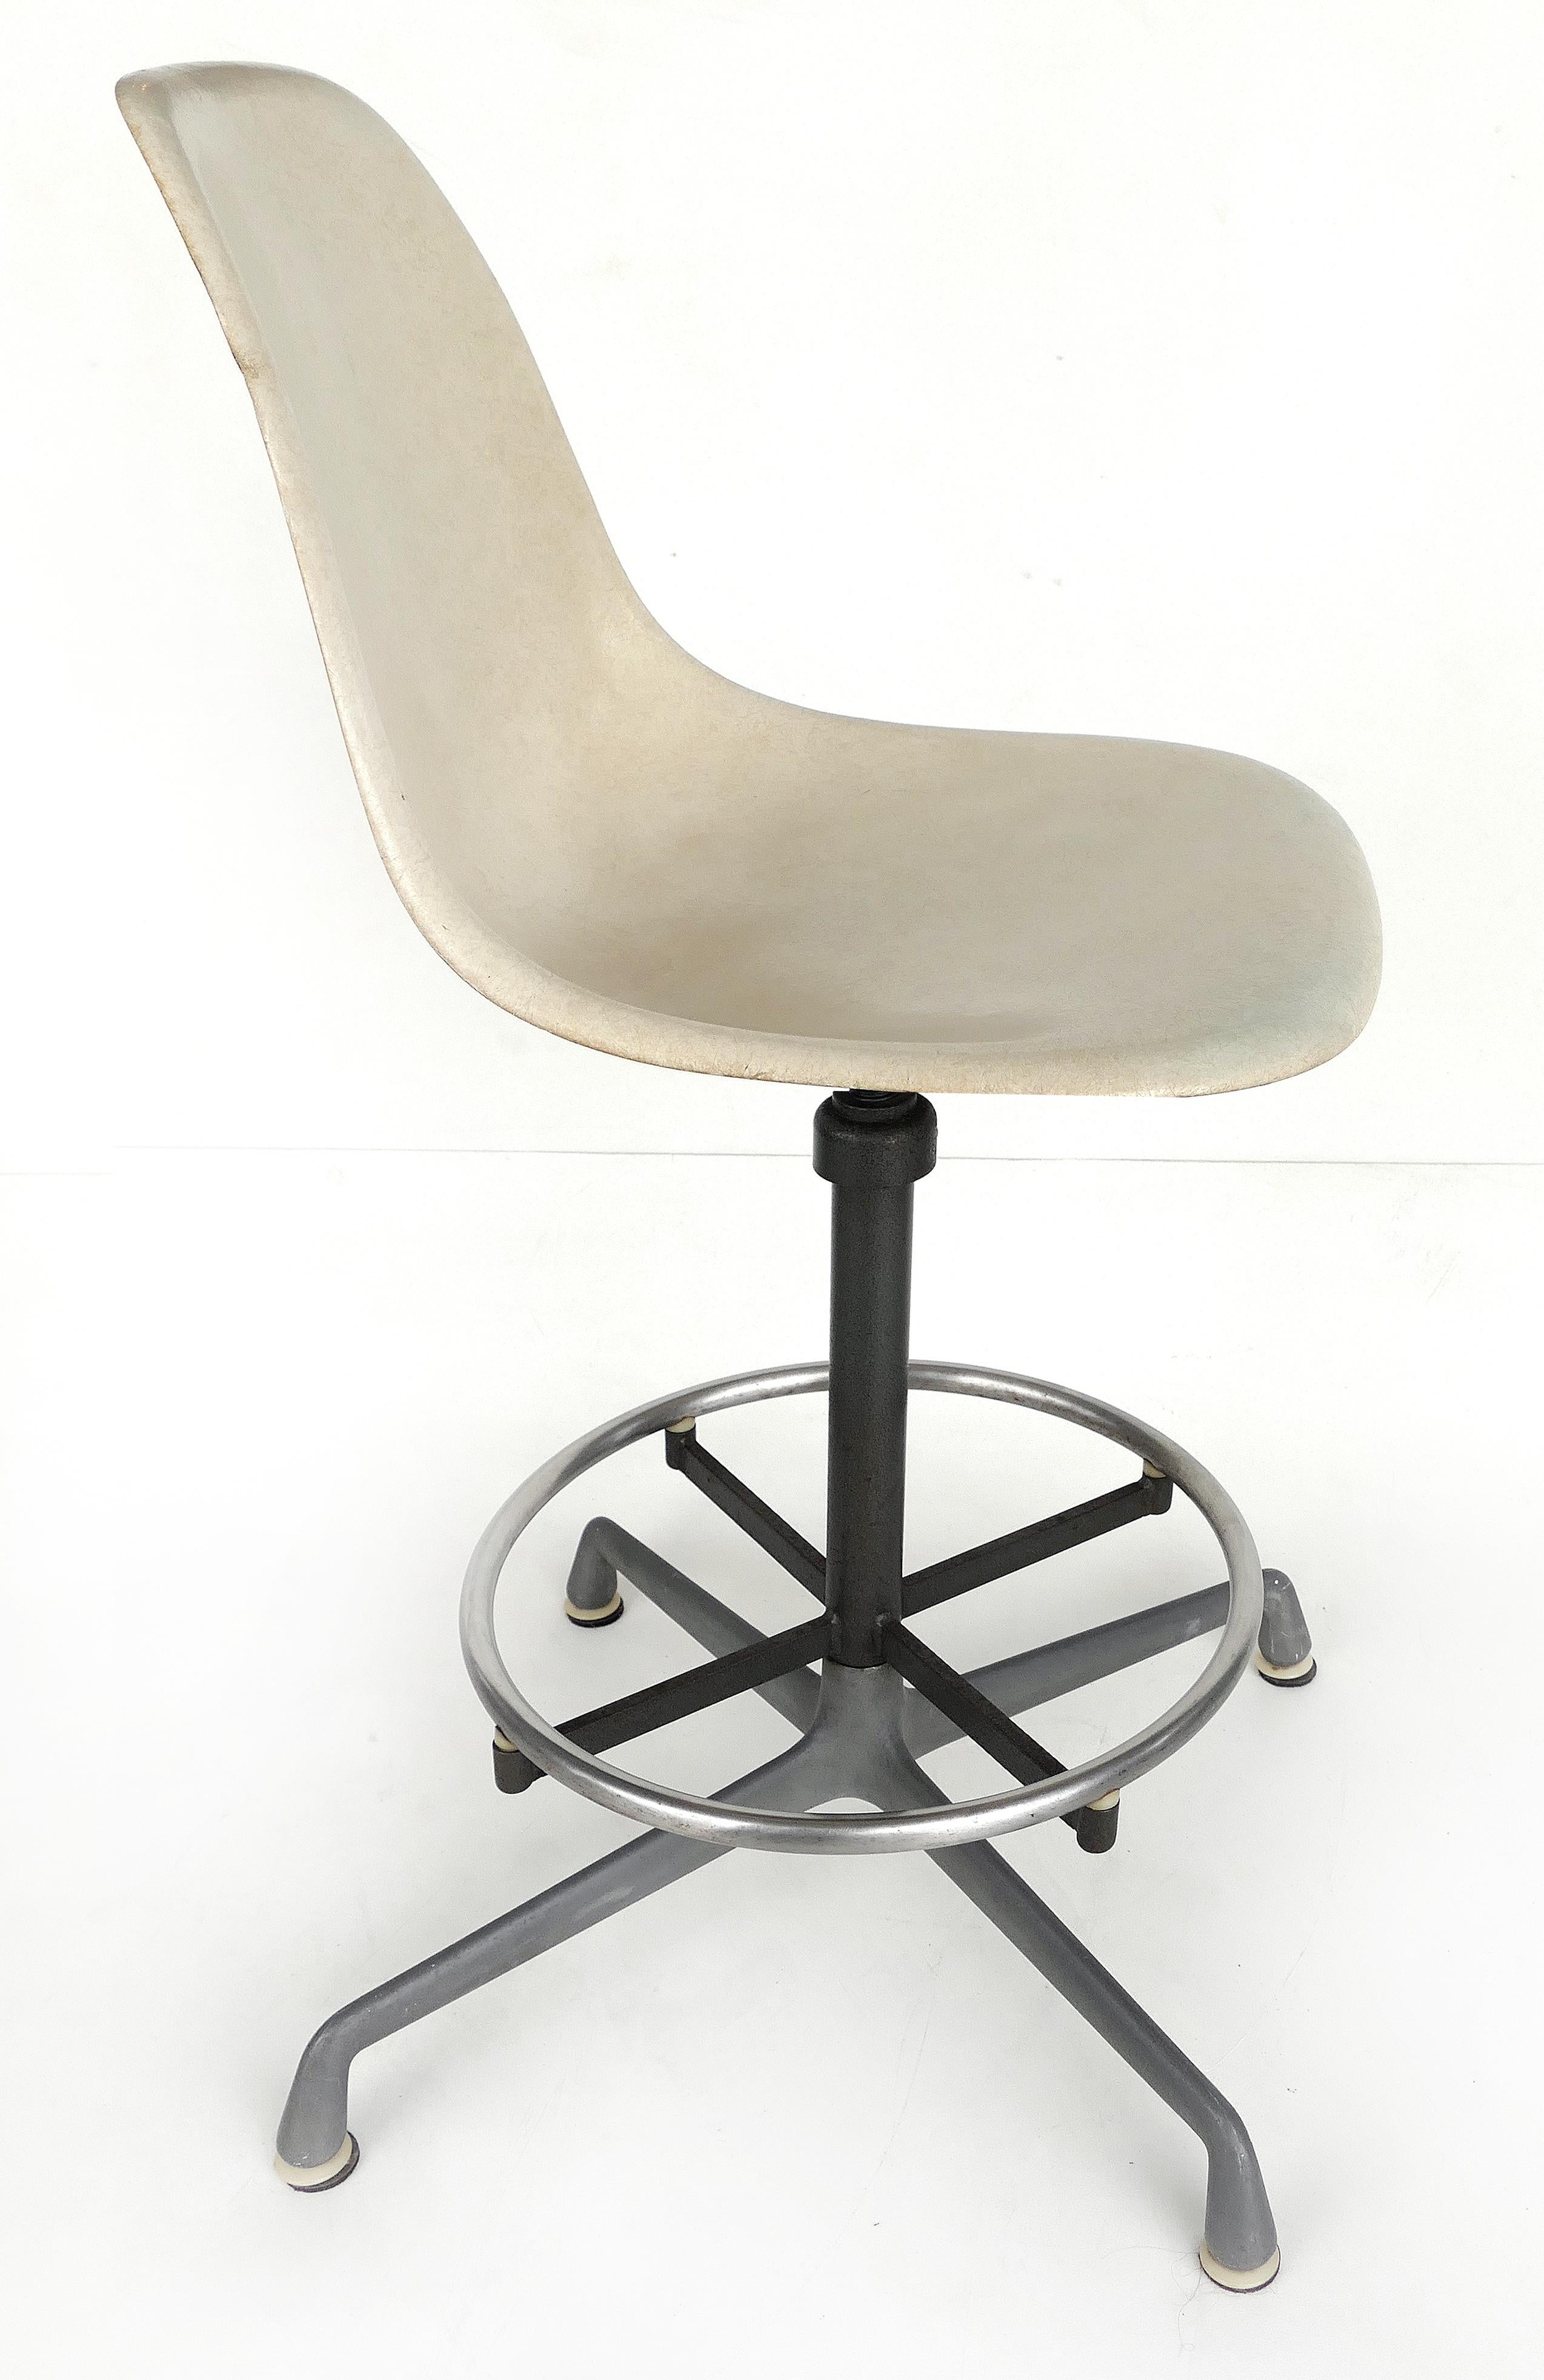 Charles Eames for Herman Miller bar/counter stools in molded fiberglass, circa 1960s

Offered for sale is a pair of Charles Eames designs for Herman Miller molded fiberglass swivel bar/counter stools with adjustable seat heights, in very good